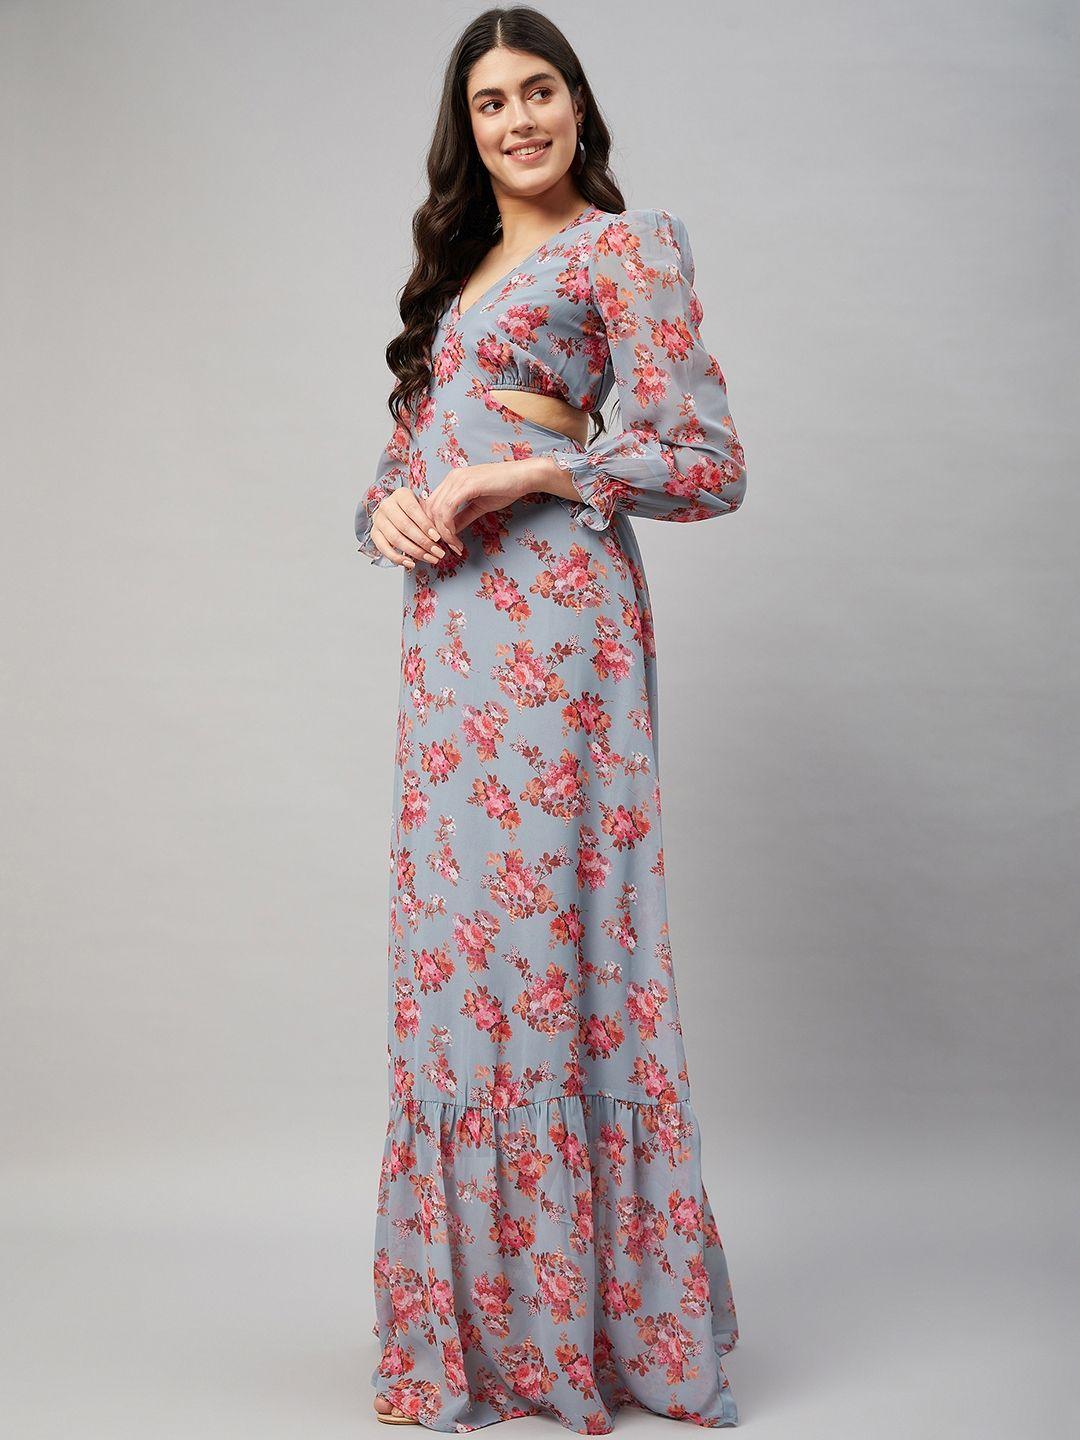 orchid-hues-floral-print-bell-sleeve-georgette-maxi-dress